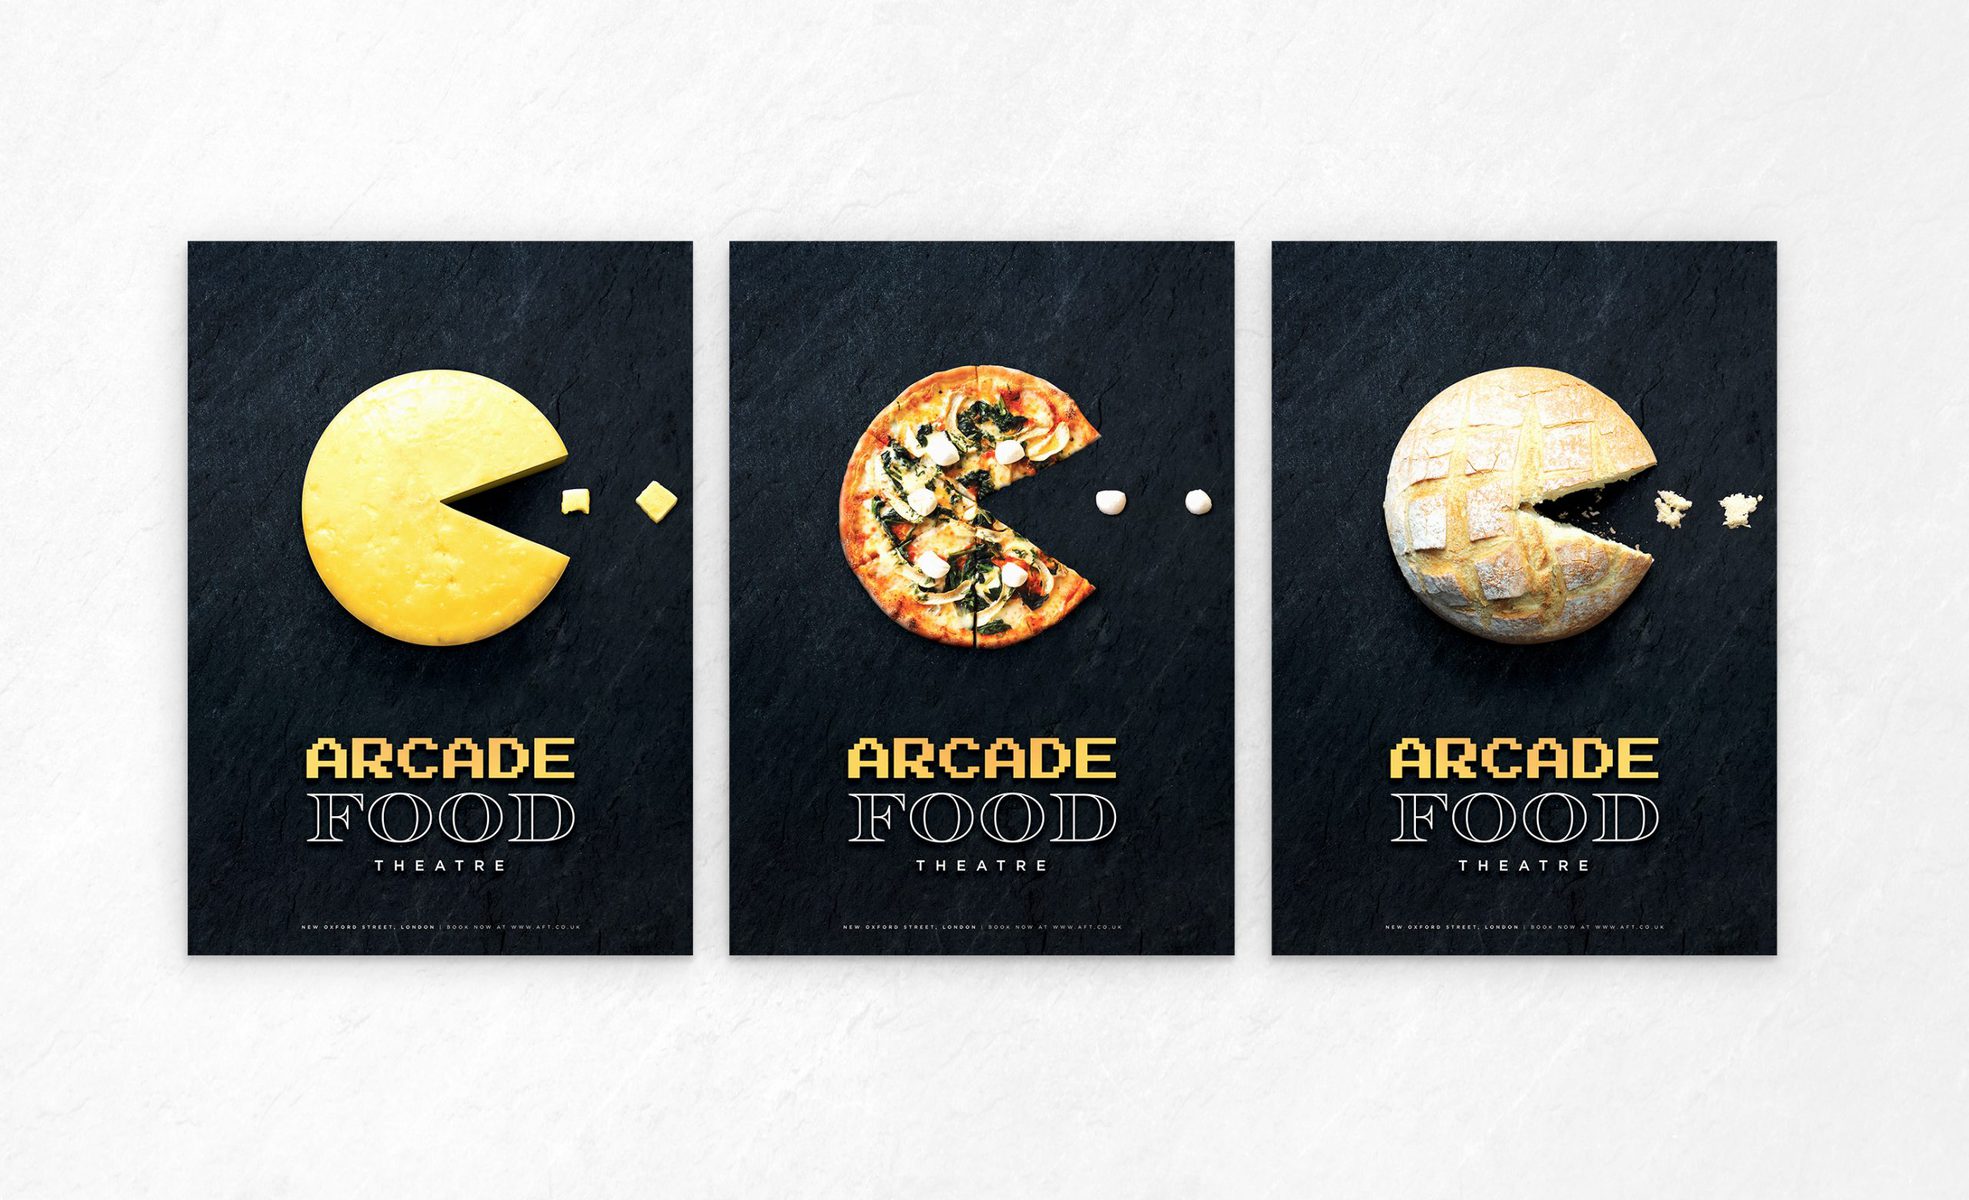 Arcade Food Theatre | Poster Design by Ben Chamberlain, Norwich University of the Arts